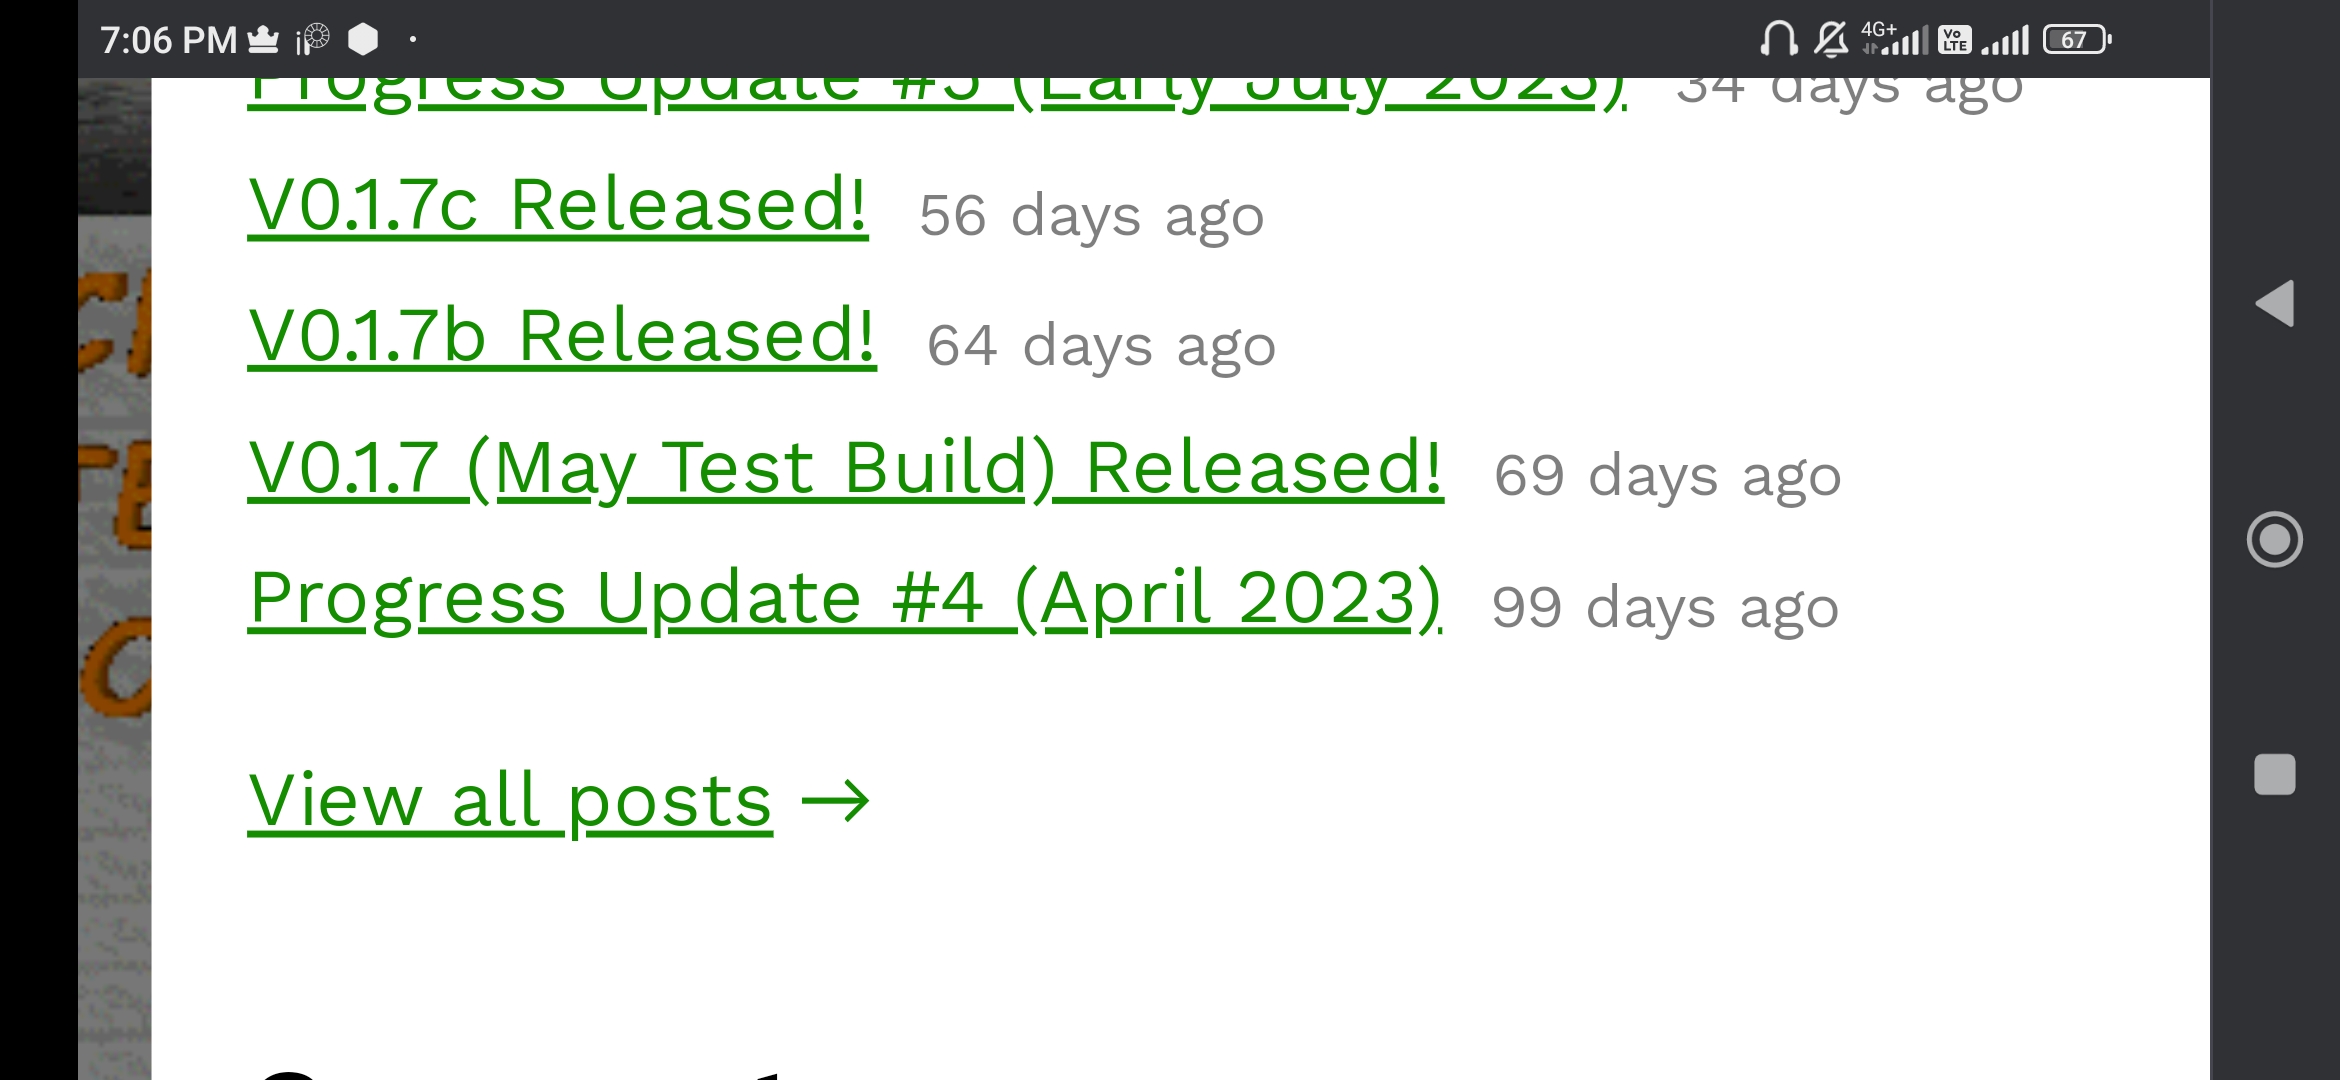 V0.1.7 (May Test Build) Released! 69 days ago